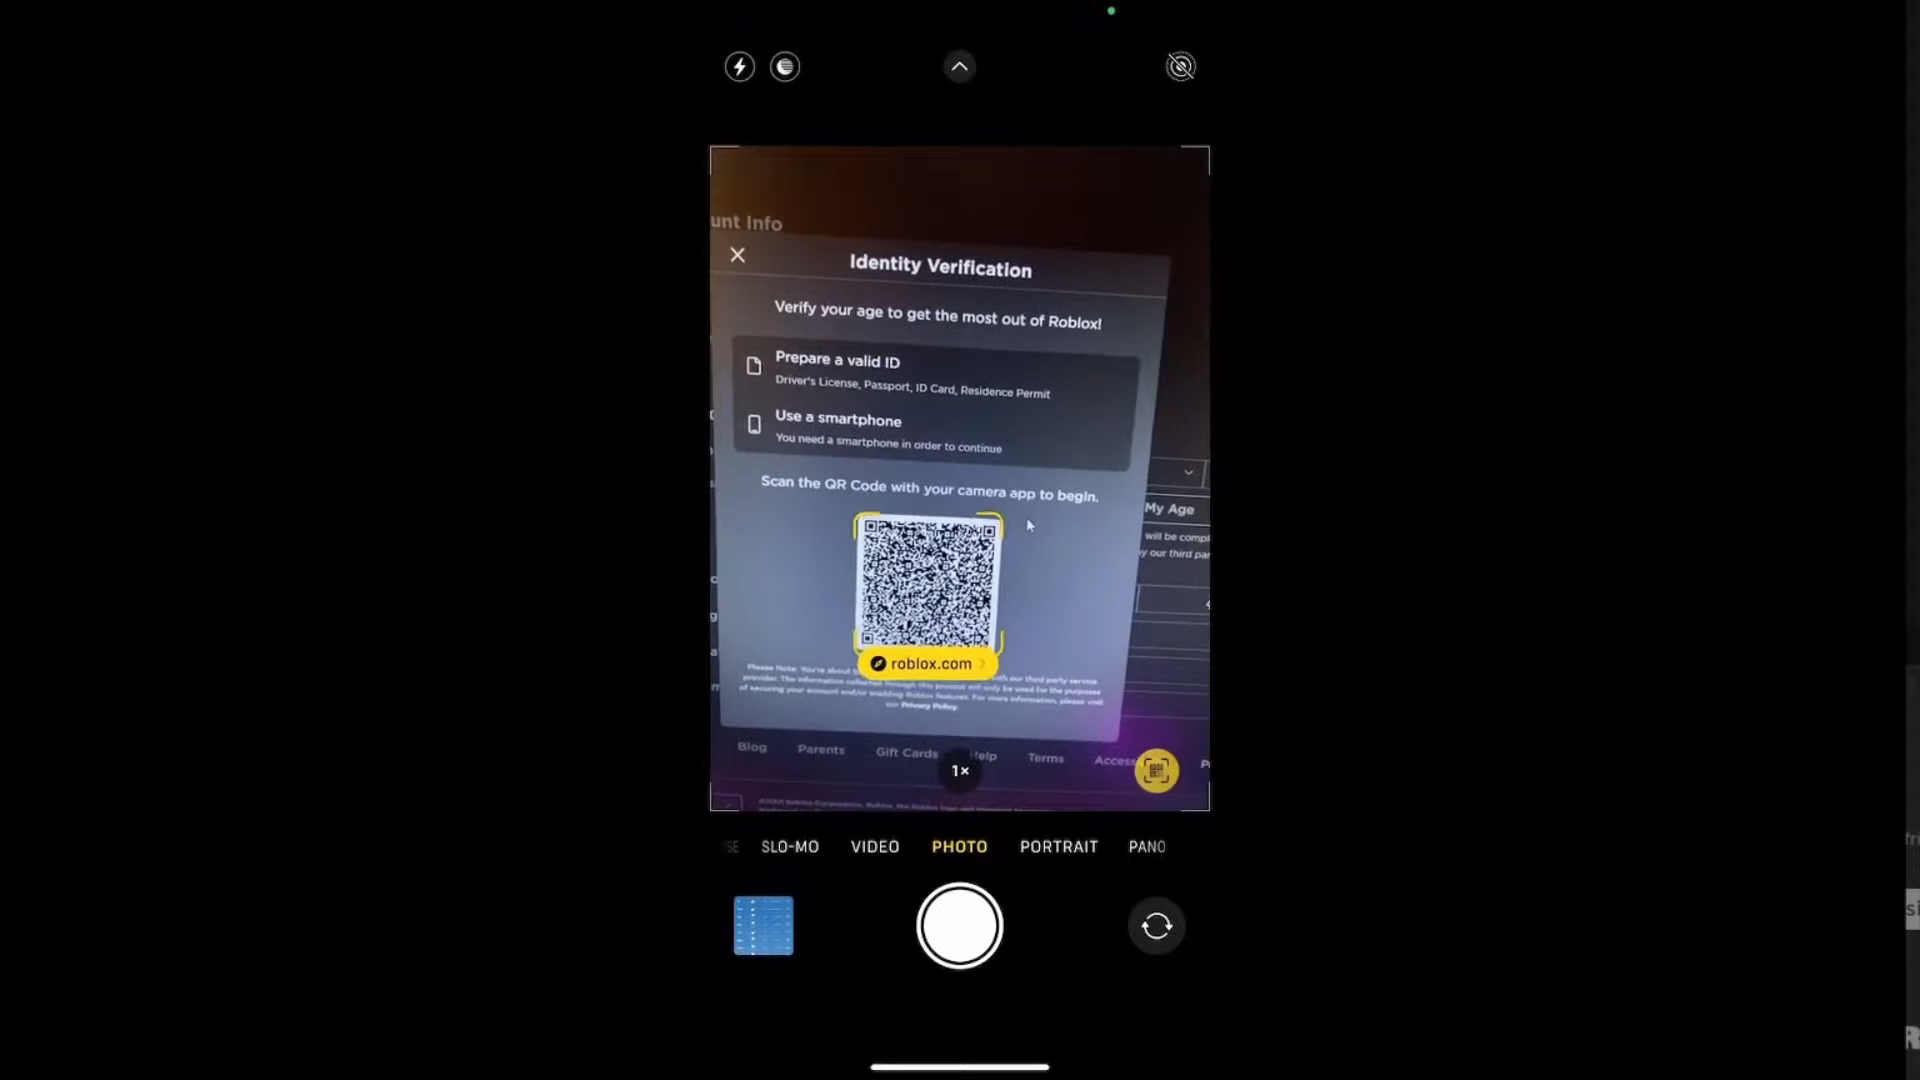 Open your phone and open the camera app and scan the QR code on the screen.